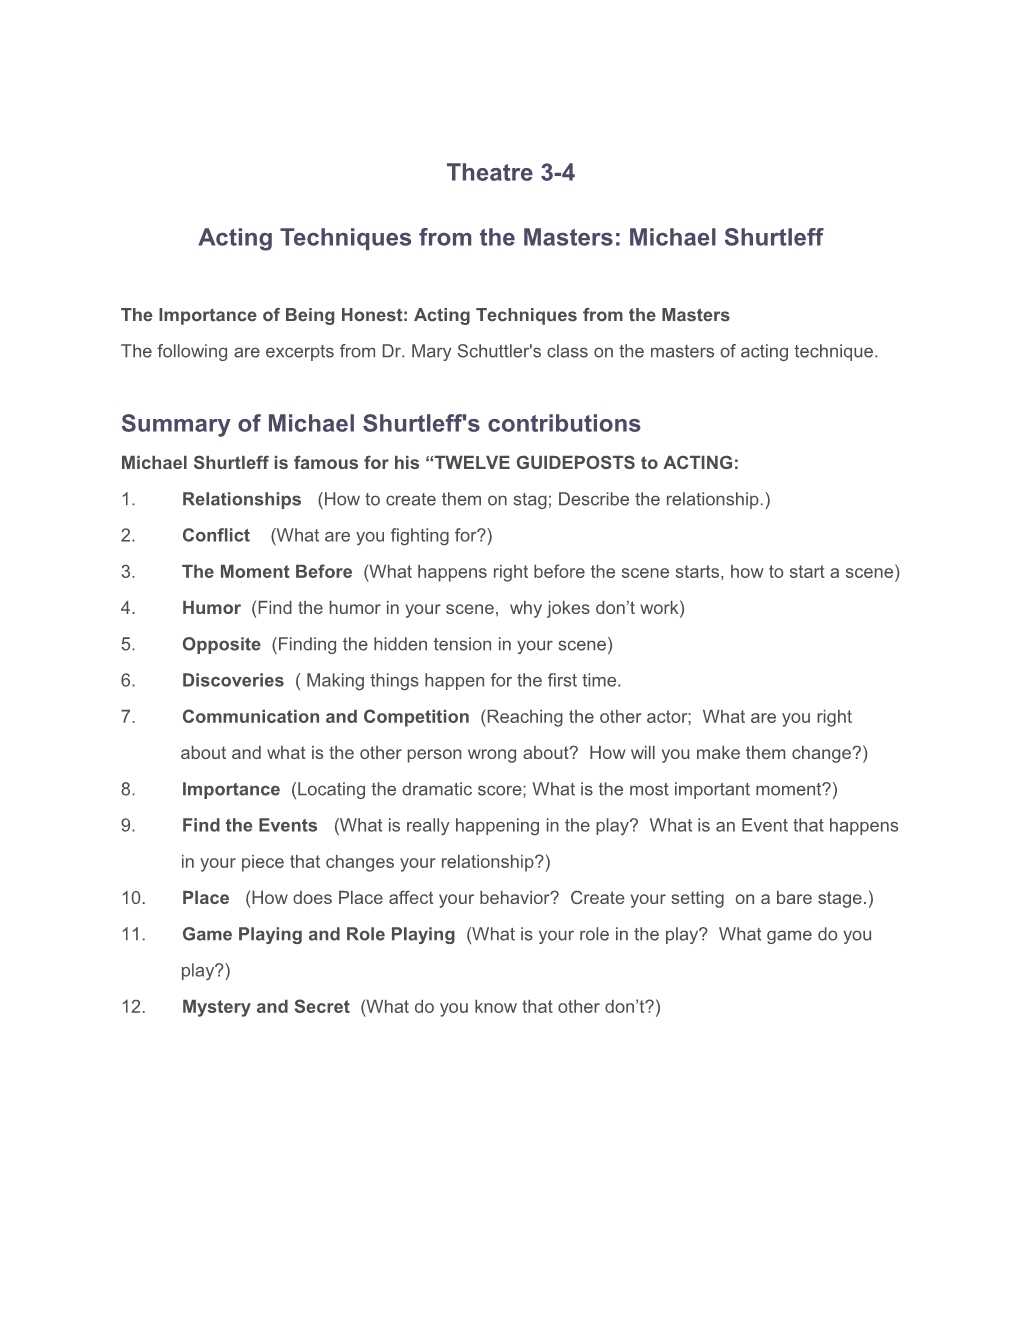 Acting Techniques from the Masters: Michael Shurtleff